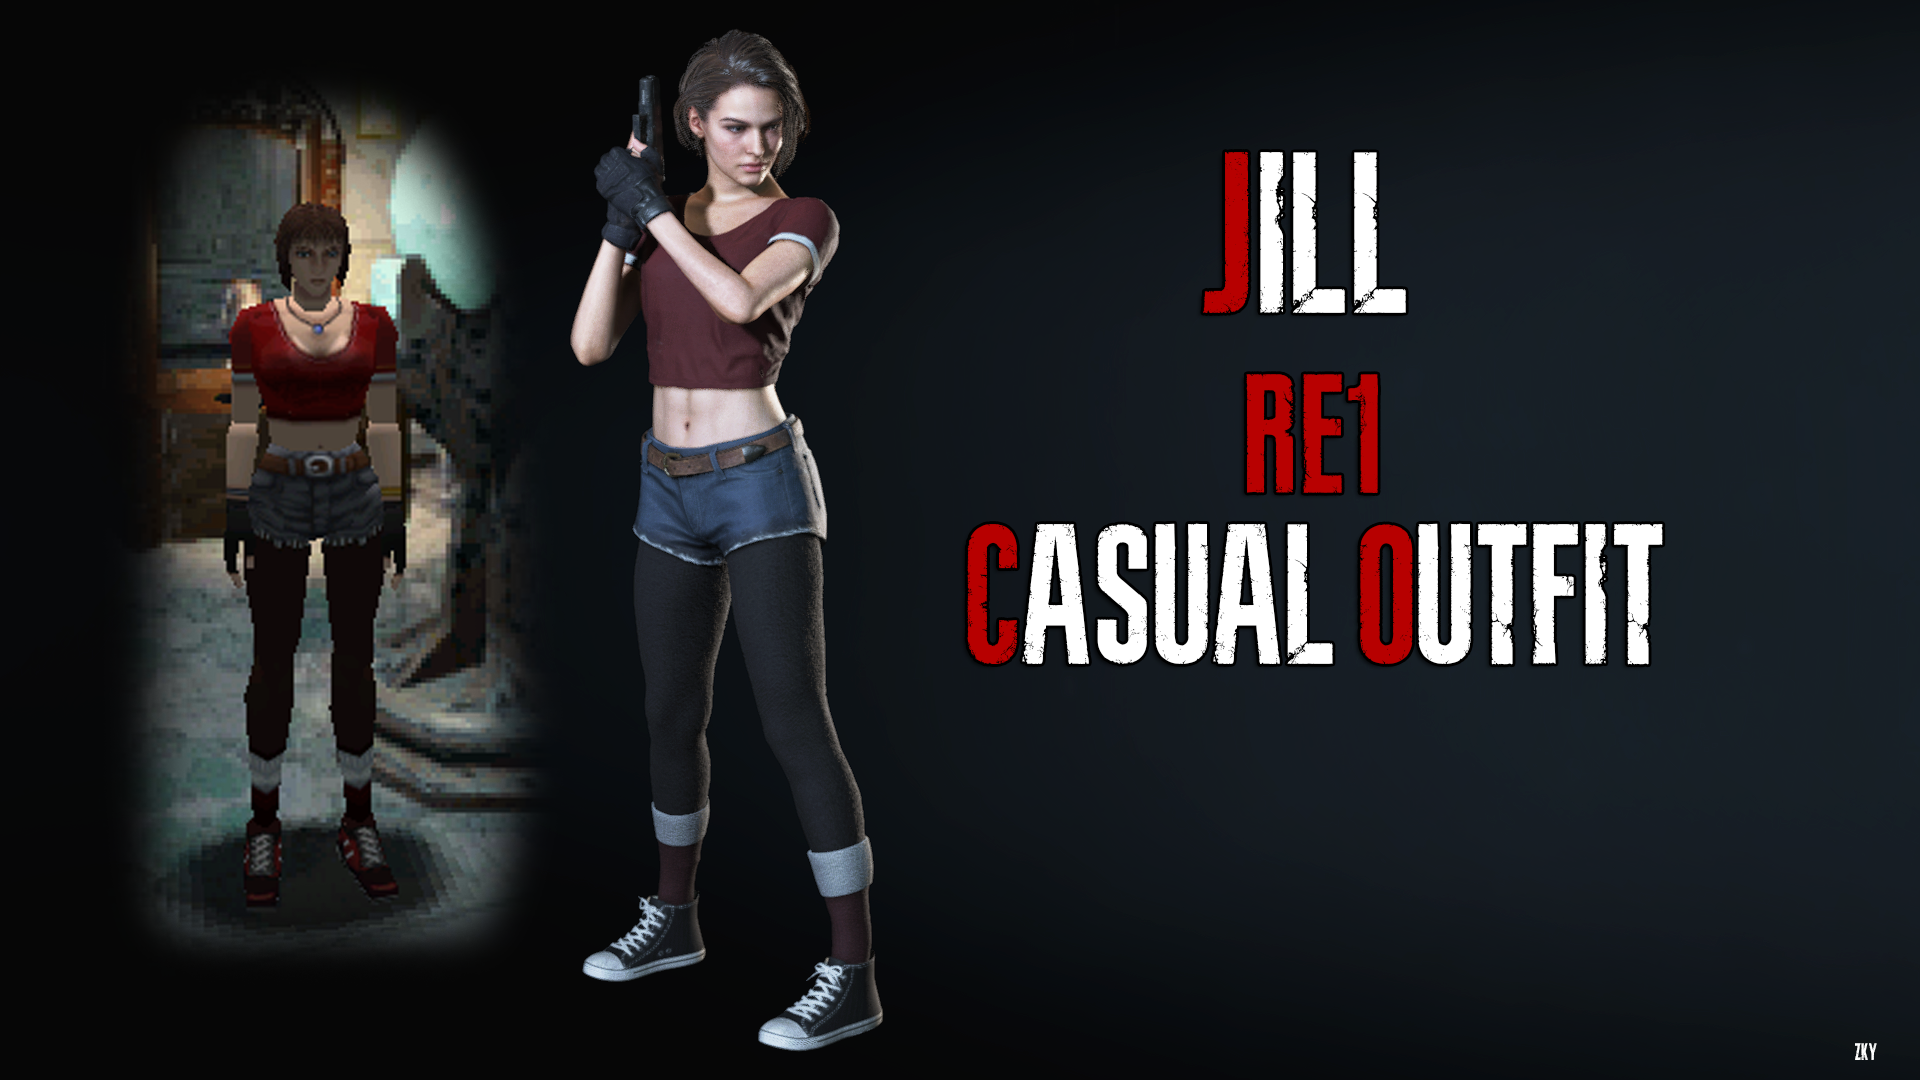 Steam Community :: Guide :: Resident Evil 3: Classic Edition Mod Pack  (Features + Installation)